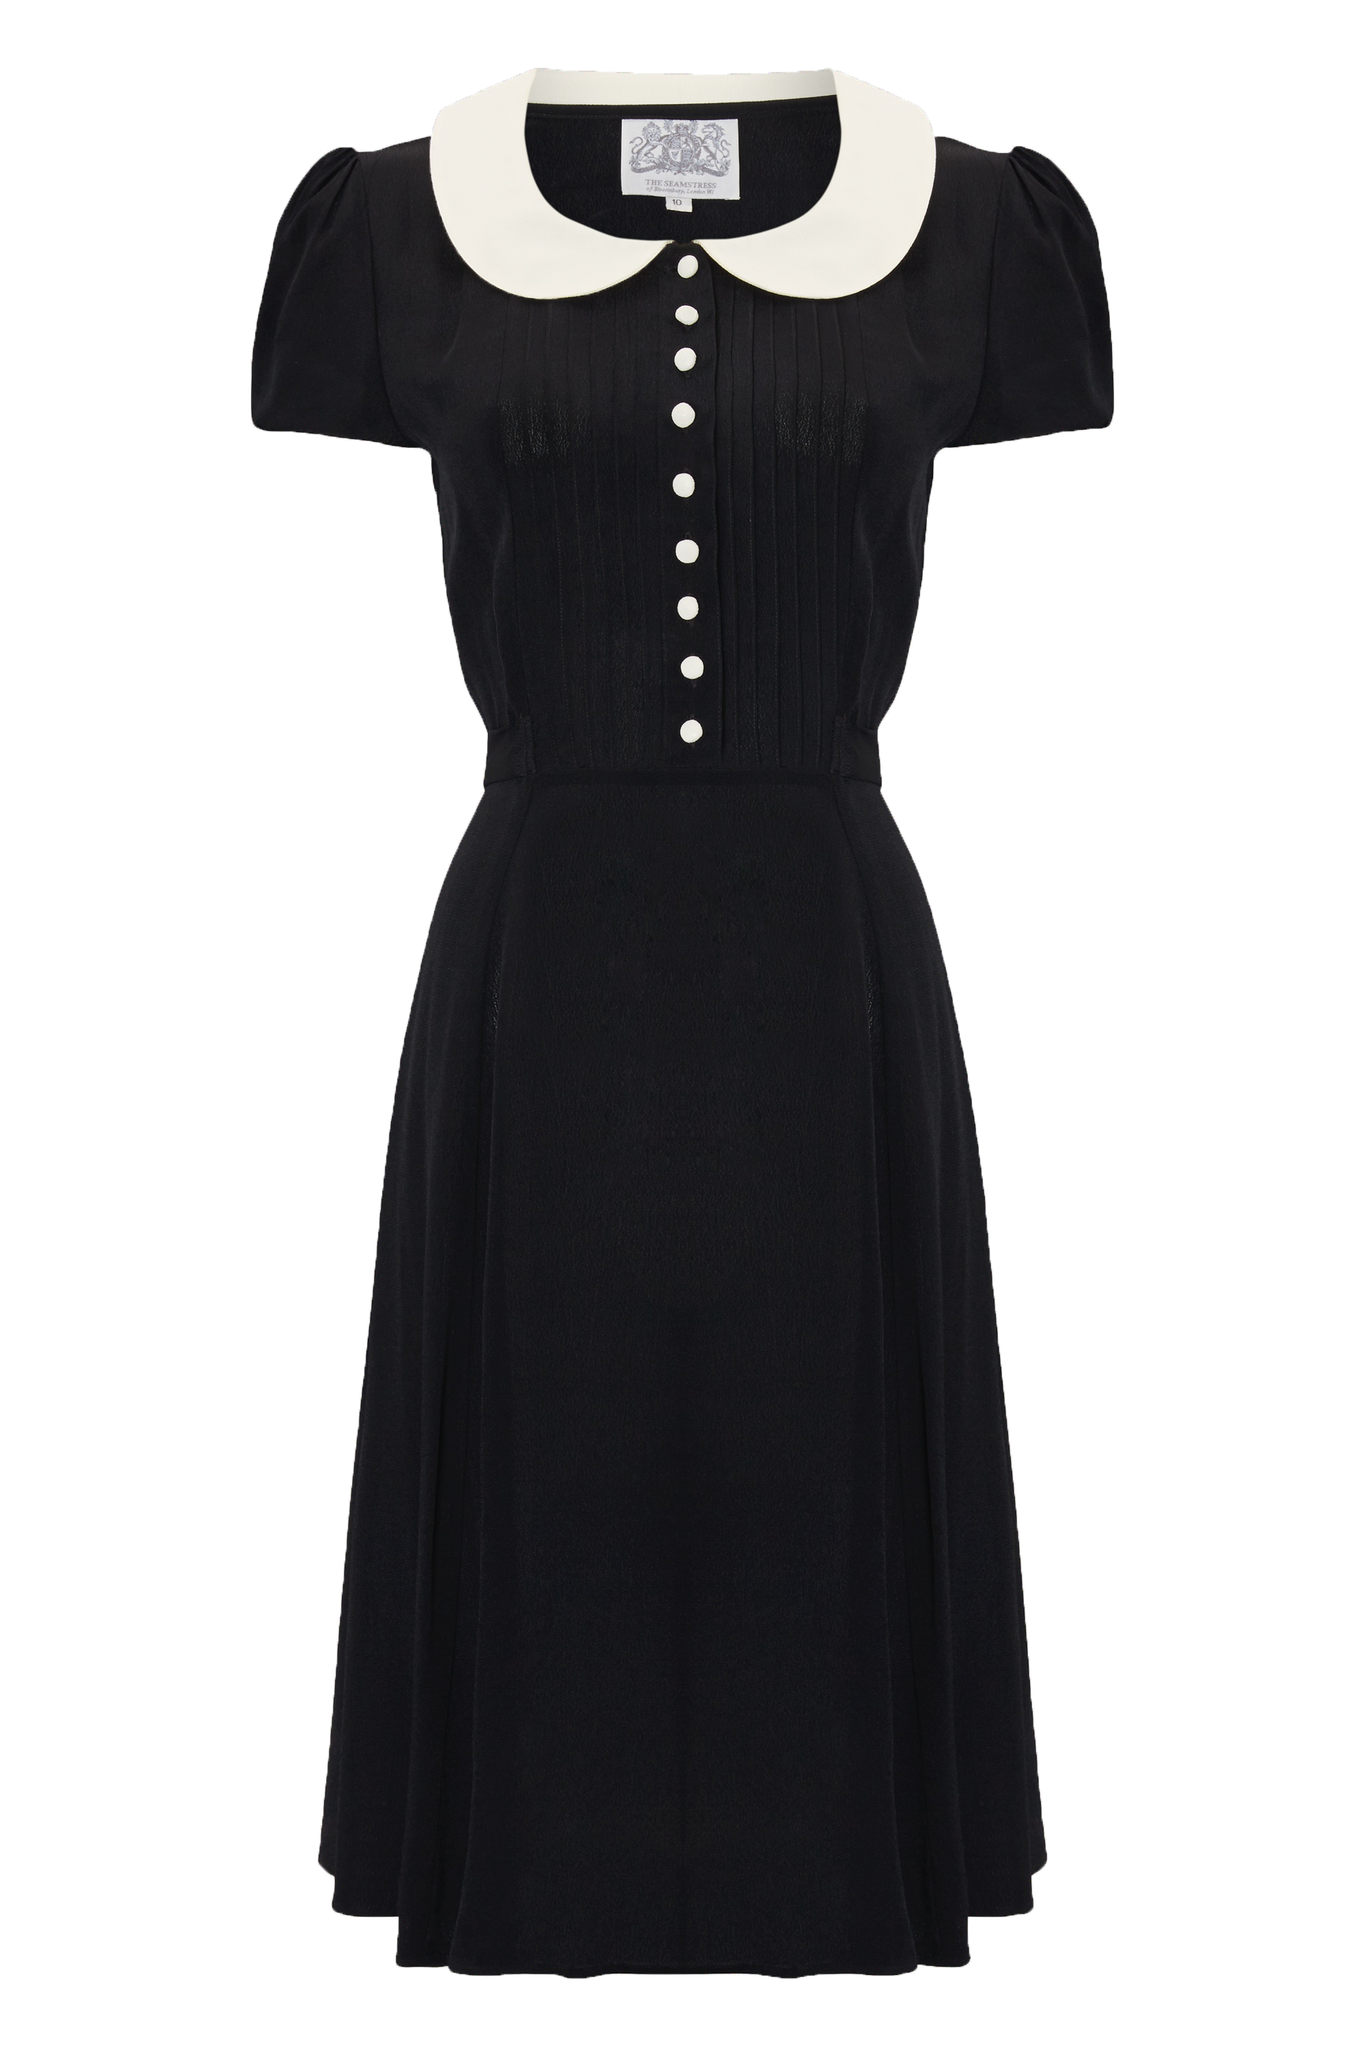 "Dorothy" Dress in Black with Contrast Collar, Classic 1940s Vintage Style - True and authentic vintage style clothing, inspired by the Classic styles of CC41 , WW2 and the fun 1950s RocknRoll era, for everyday wear plus events like Goodwood Revival, Twinwood Festival and Viva Las Vegas Rockabilly Weekend Rock n Romance The Seamstress Of Bloomsbury